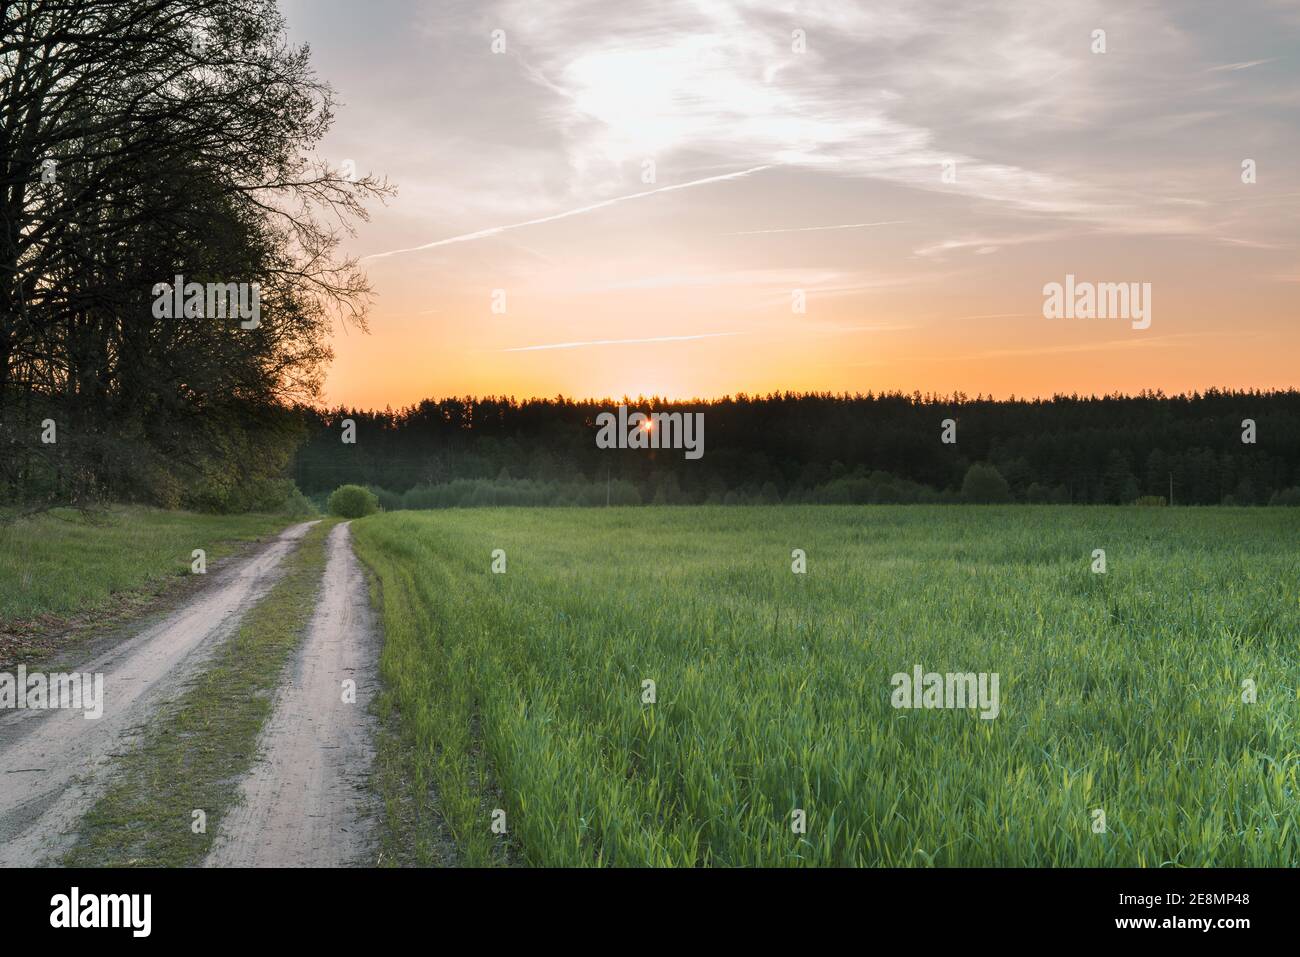 Sunset or dawn in a field with green grass, footpath and willows in the background. Early summer or spring. Landscape after rain with a light haze. Stock Photo